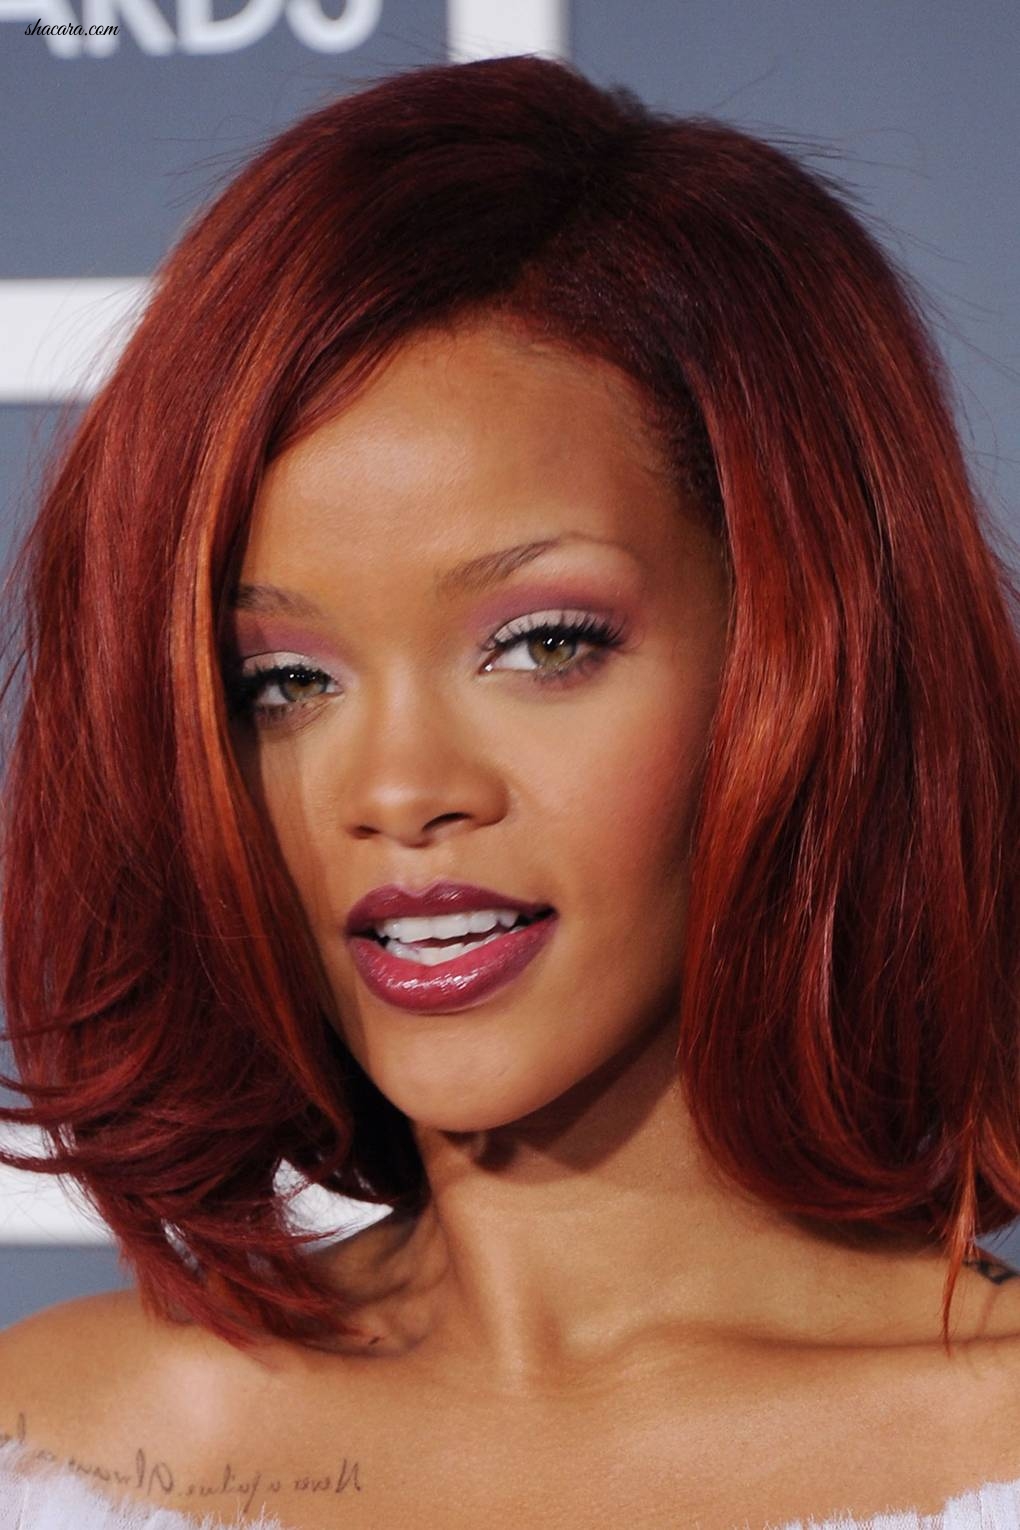 The Most Dramatic Celebrity Hair Transformations From The '90s To Now